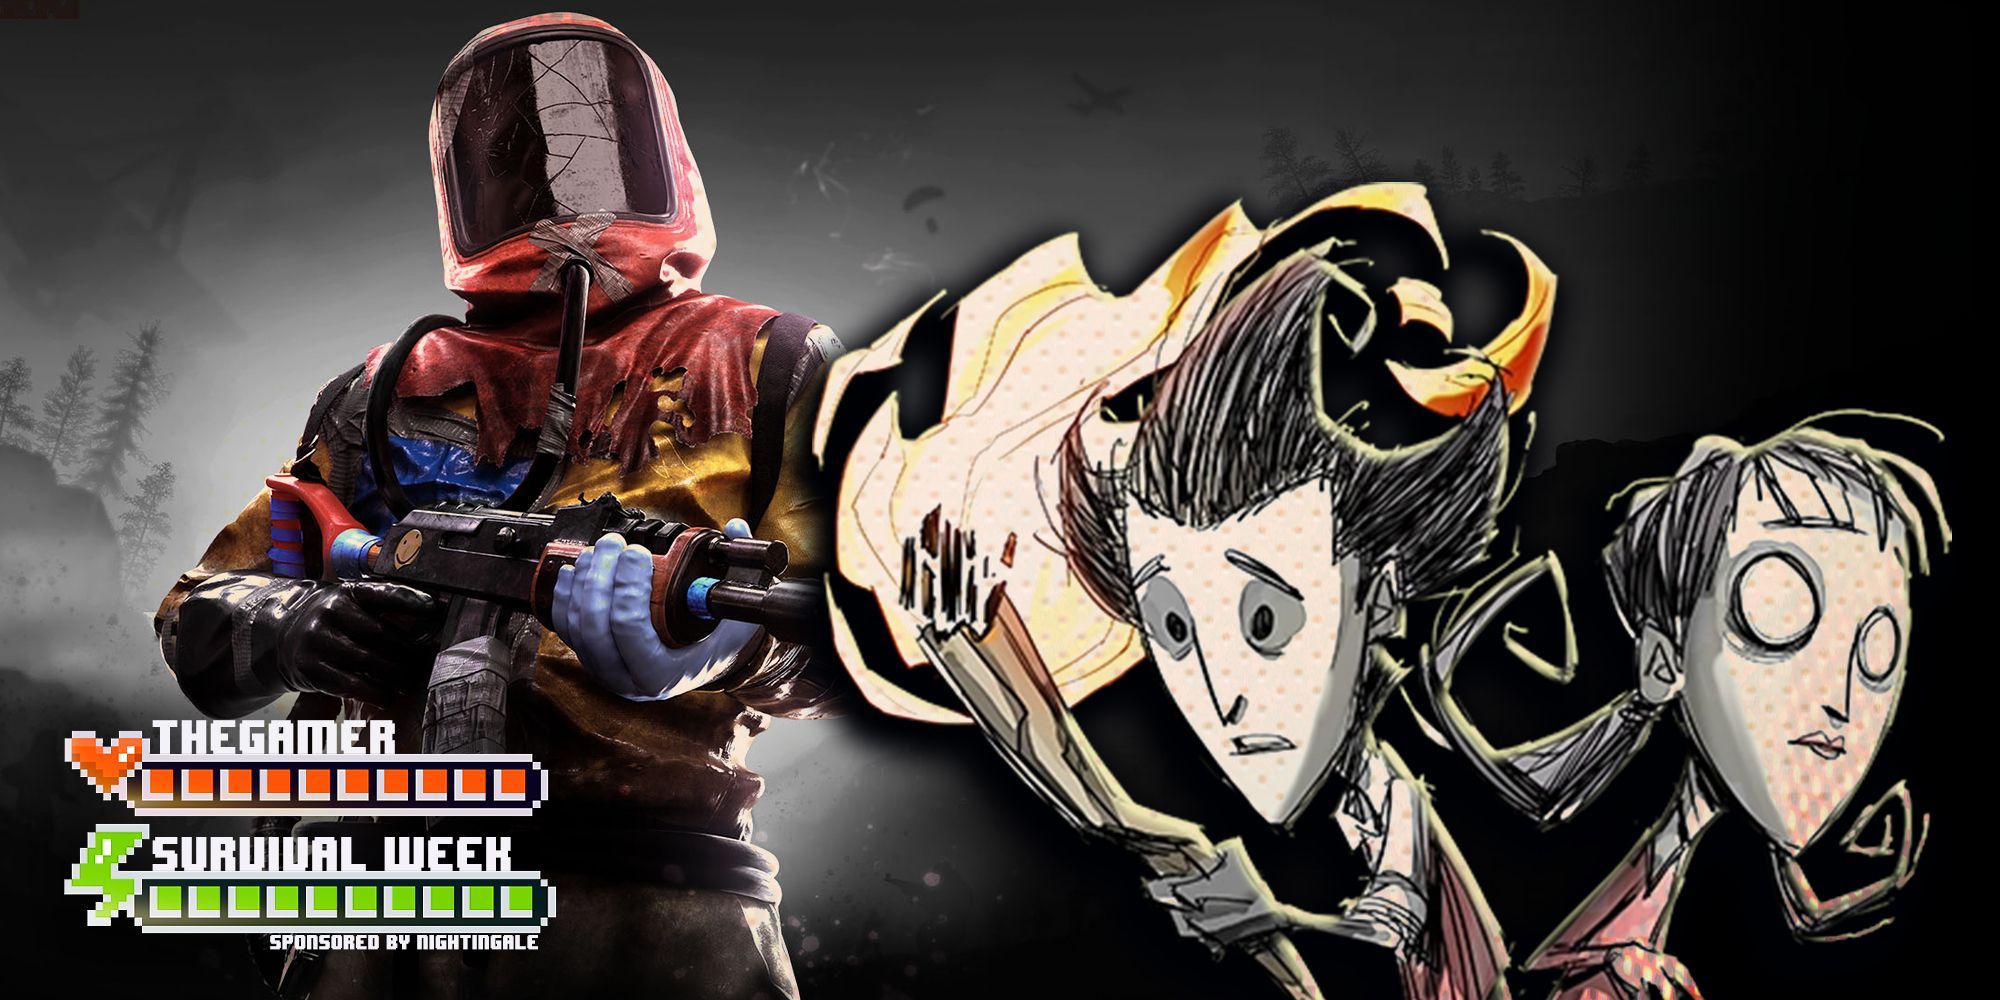 A person in a haphazardly patched together red, blue and yellow suit on the left with a gun and a big sealed helmet from Rust. The characters from Don't Starve in a Tim Burton art style on the right.